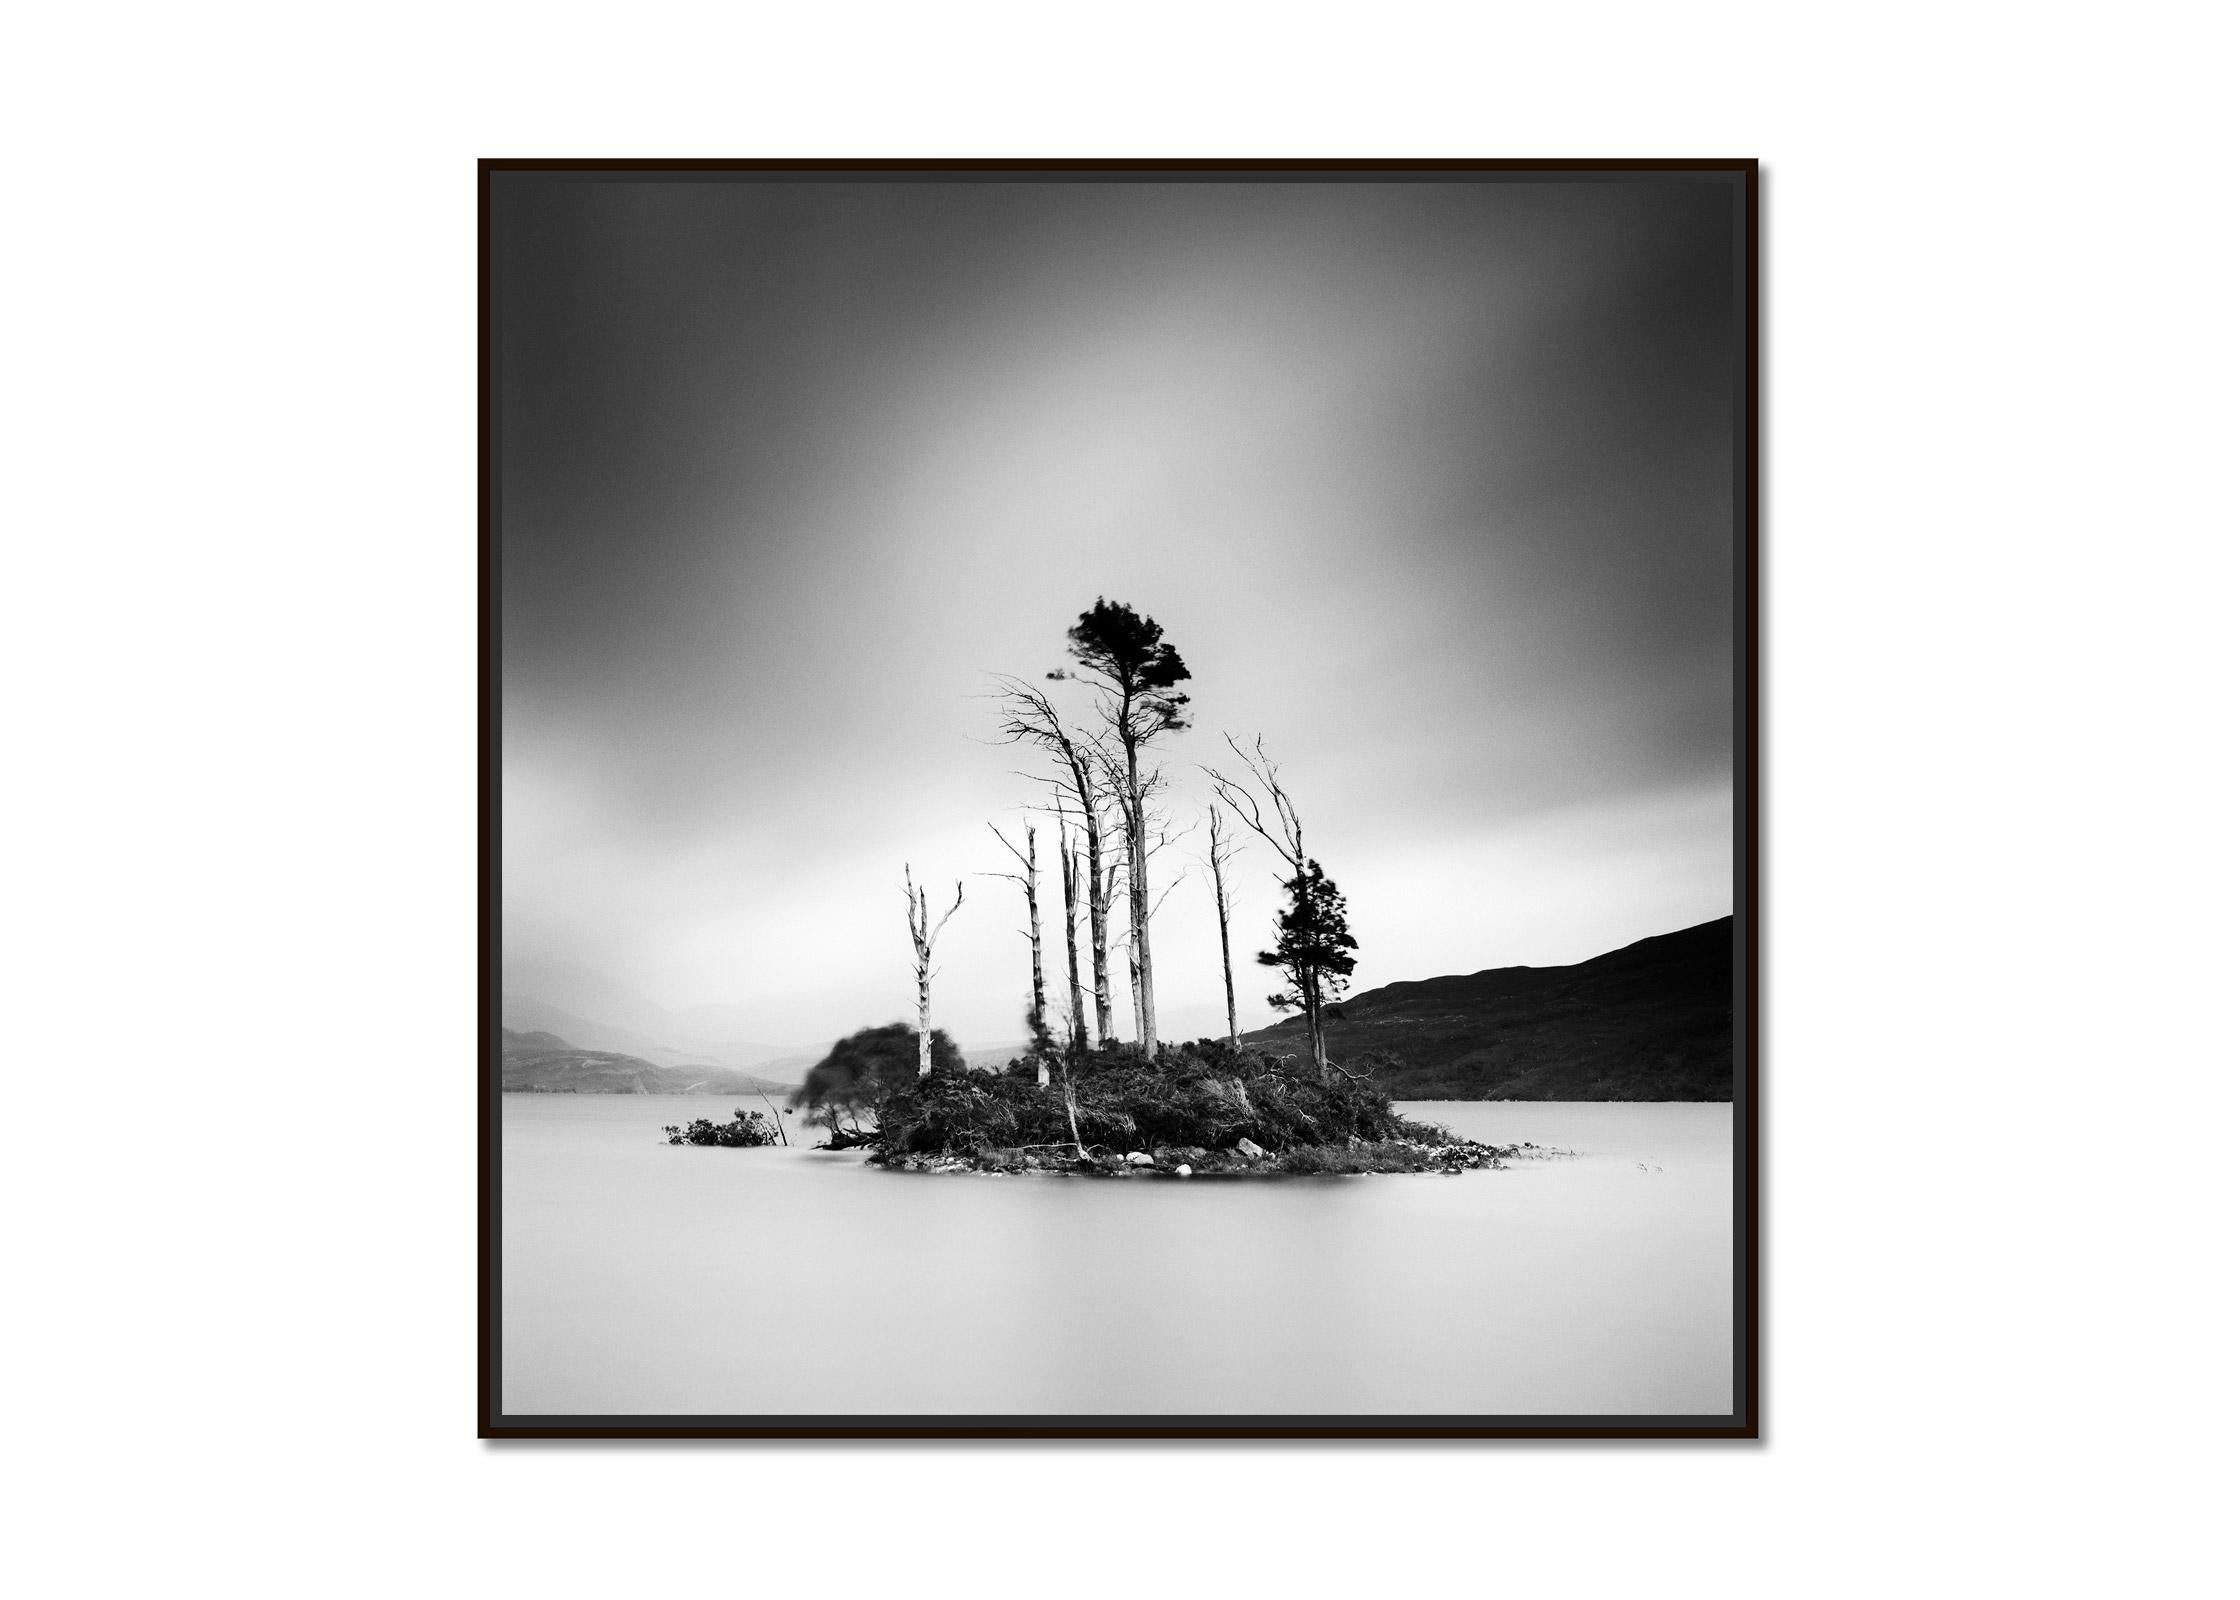 Drowned Island Trees in moor Scotland black and white landscape art photography - Photograph by Gerald Berghammer